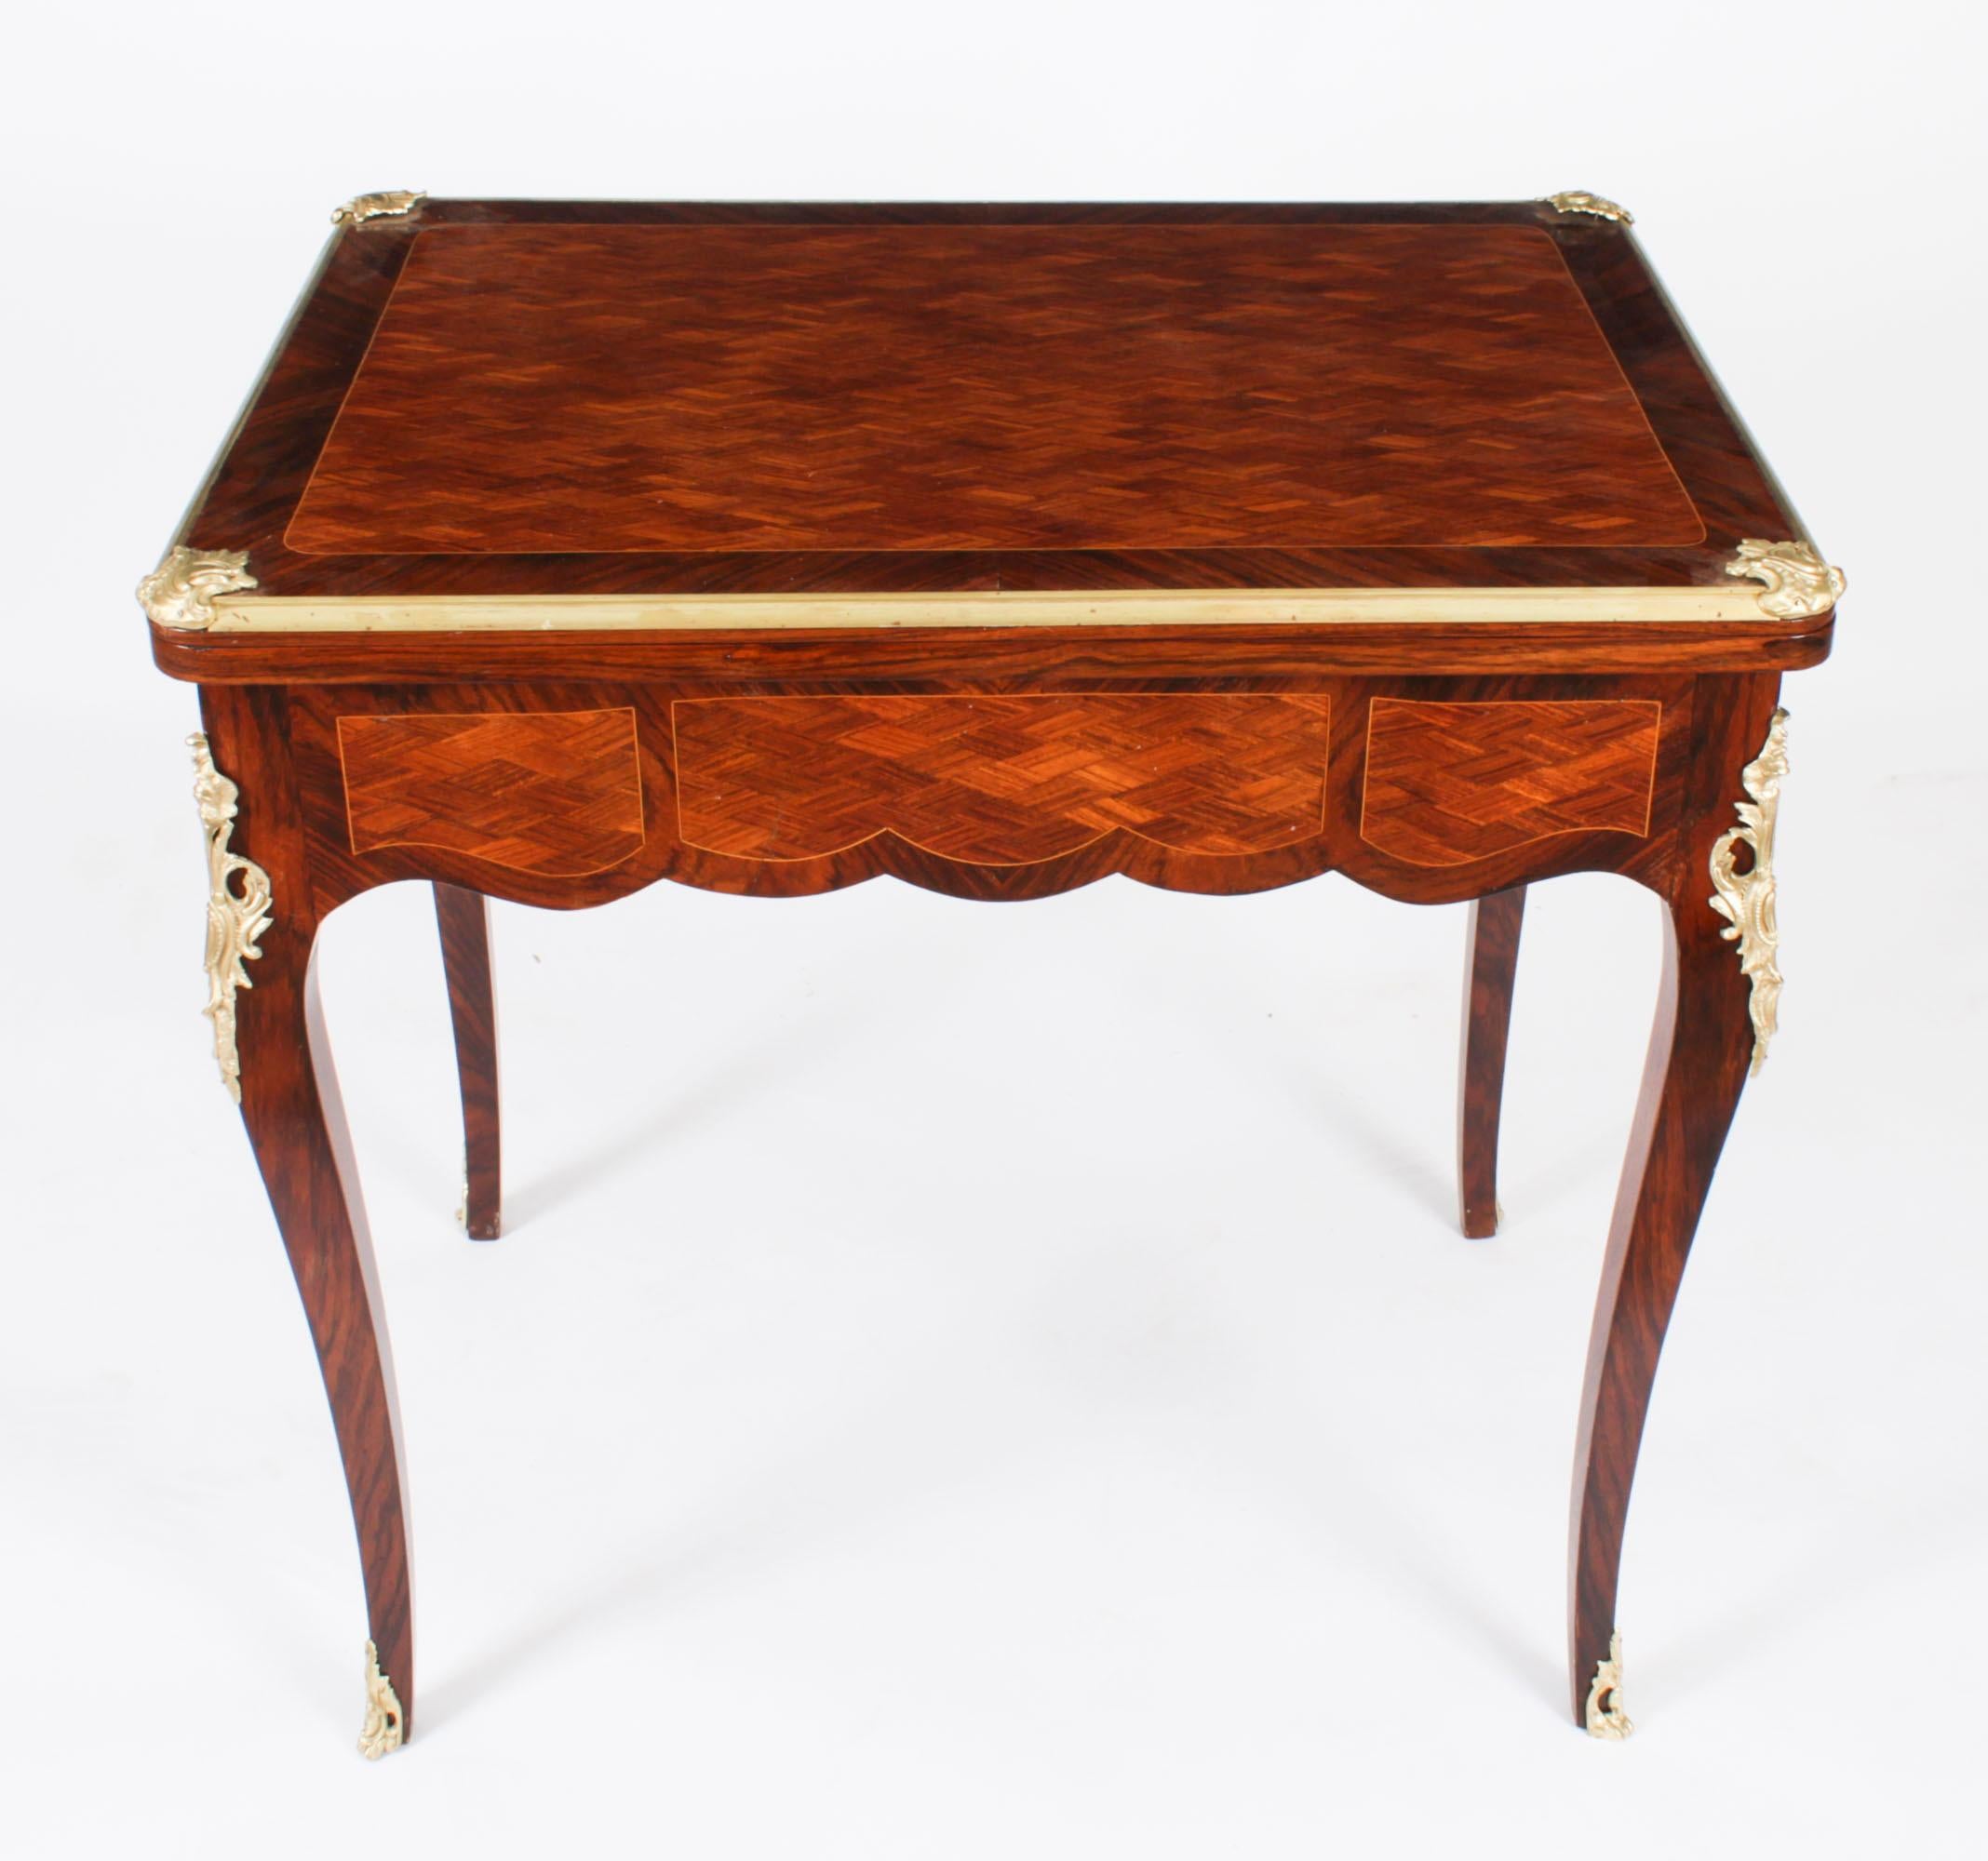 Antique French Burr Walnut Parquetry Card Backgammon Table 19th Century In Good Condition For Sale In London, GB